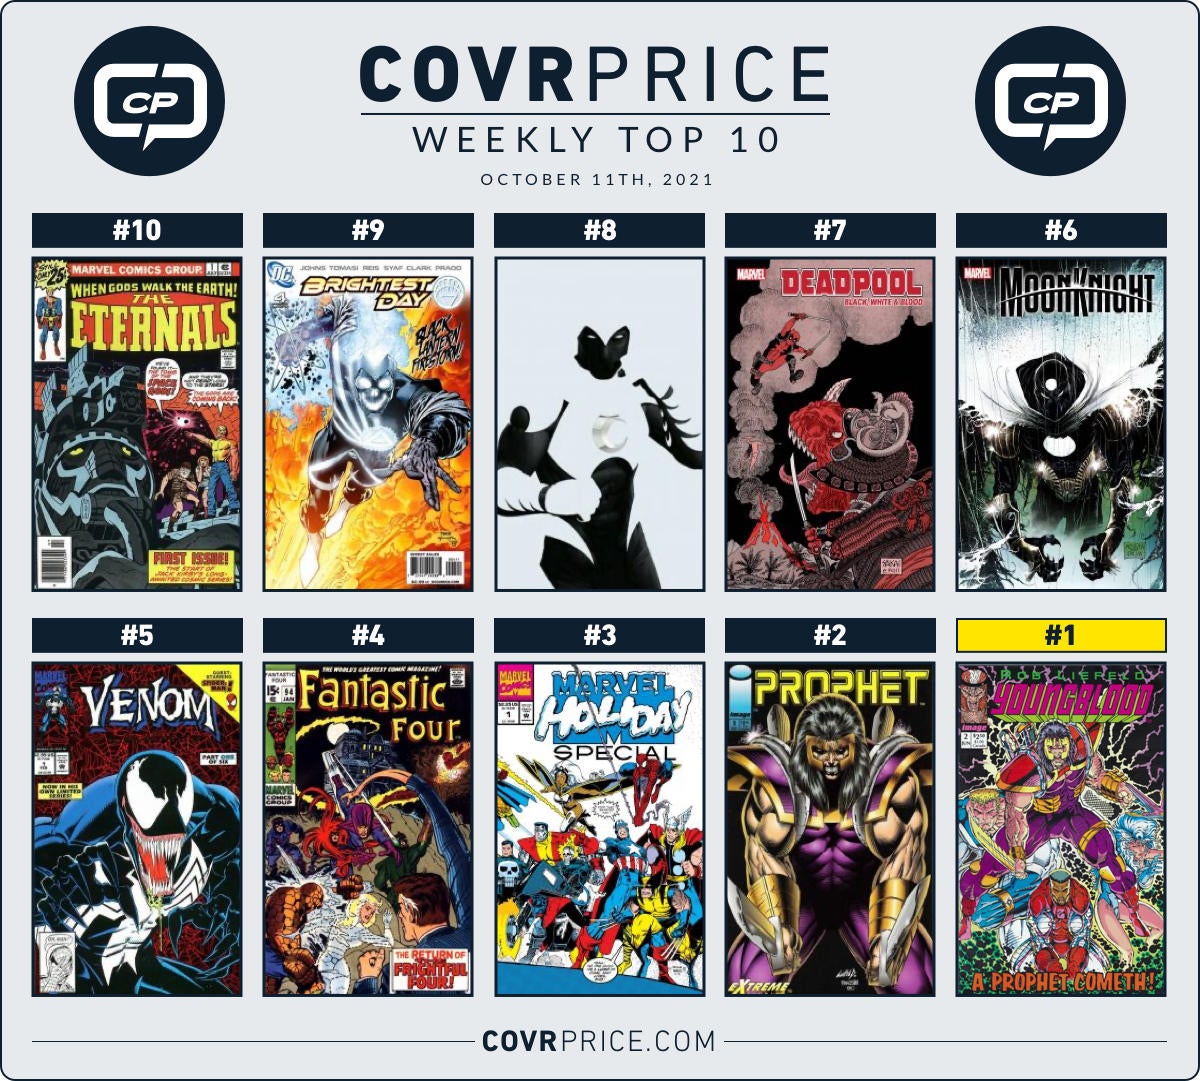 10 Comic Books From Last Week Rising In Value Include Moon Knight, Prophet More